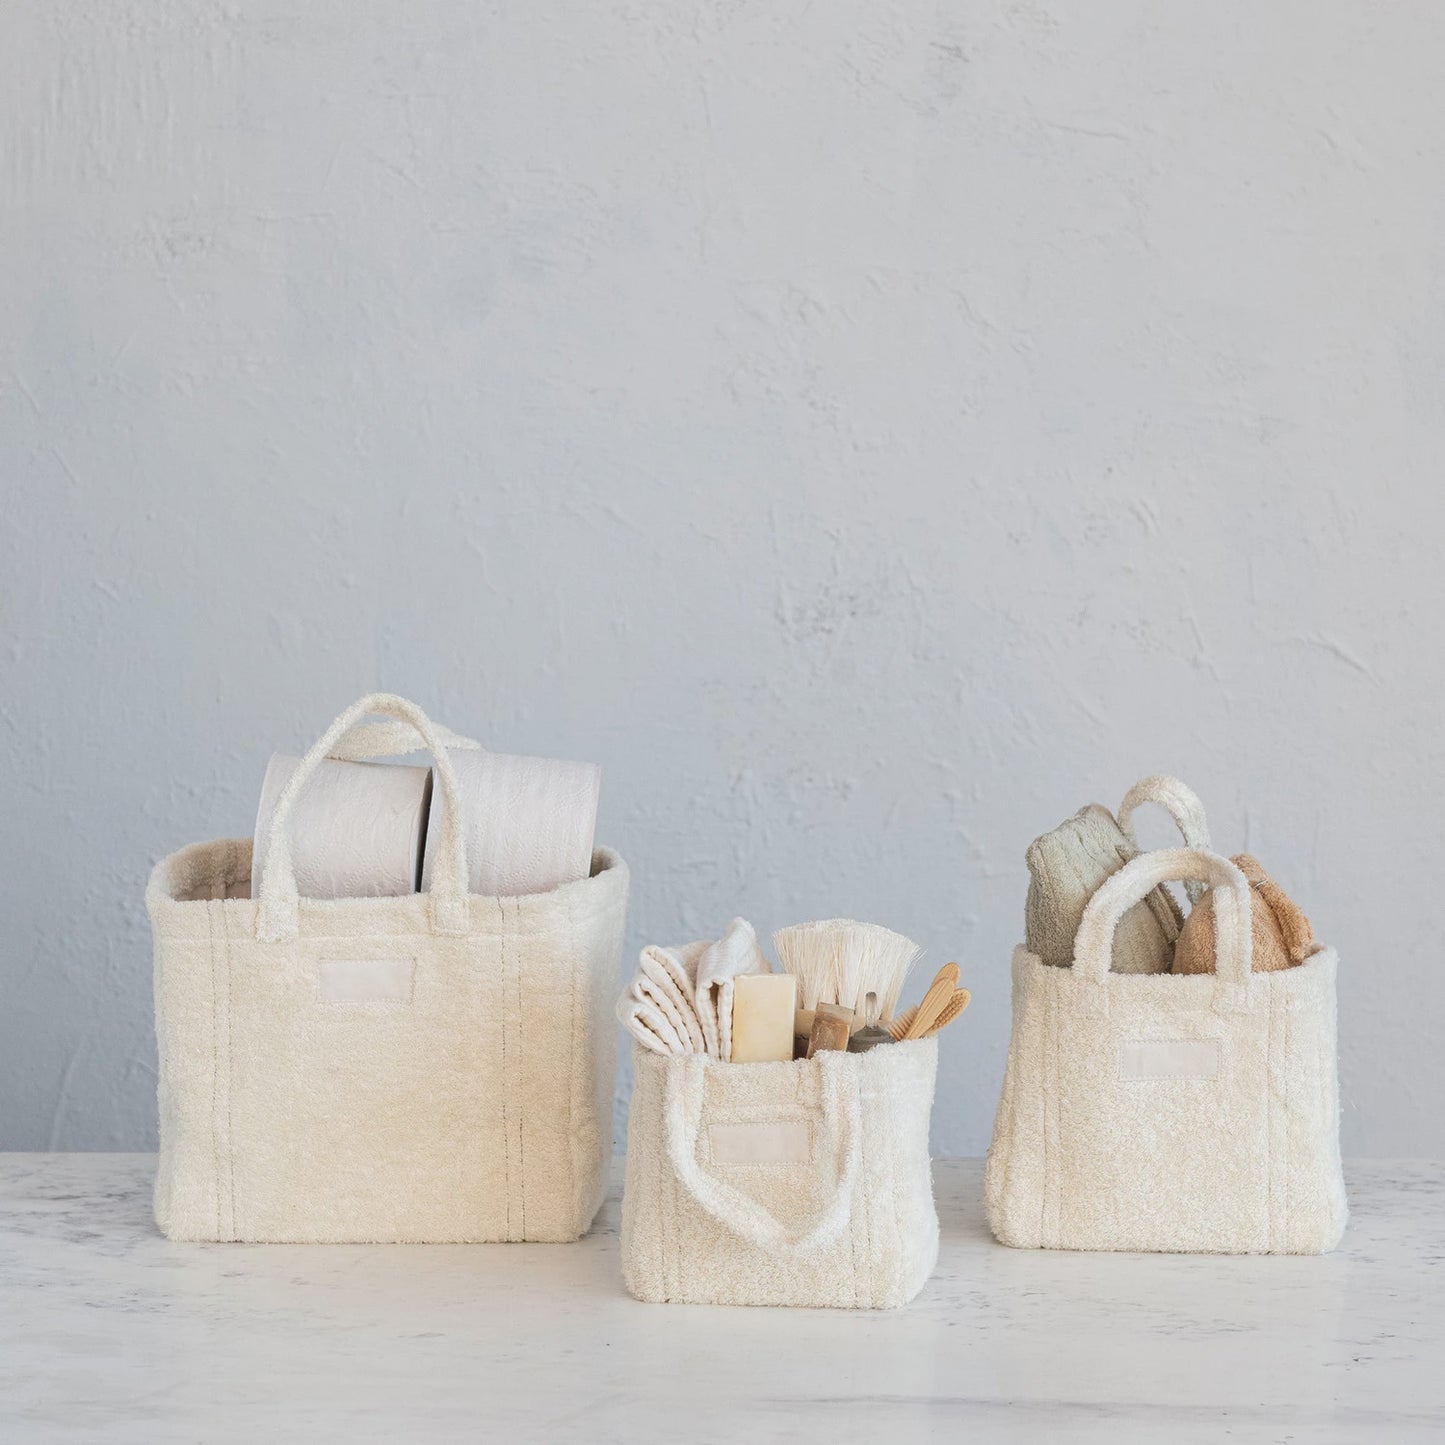 Cotton Terry Tote Bags w/ Handles